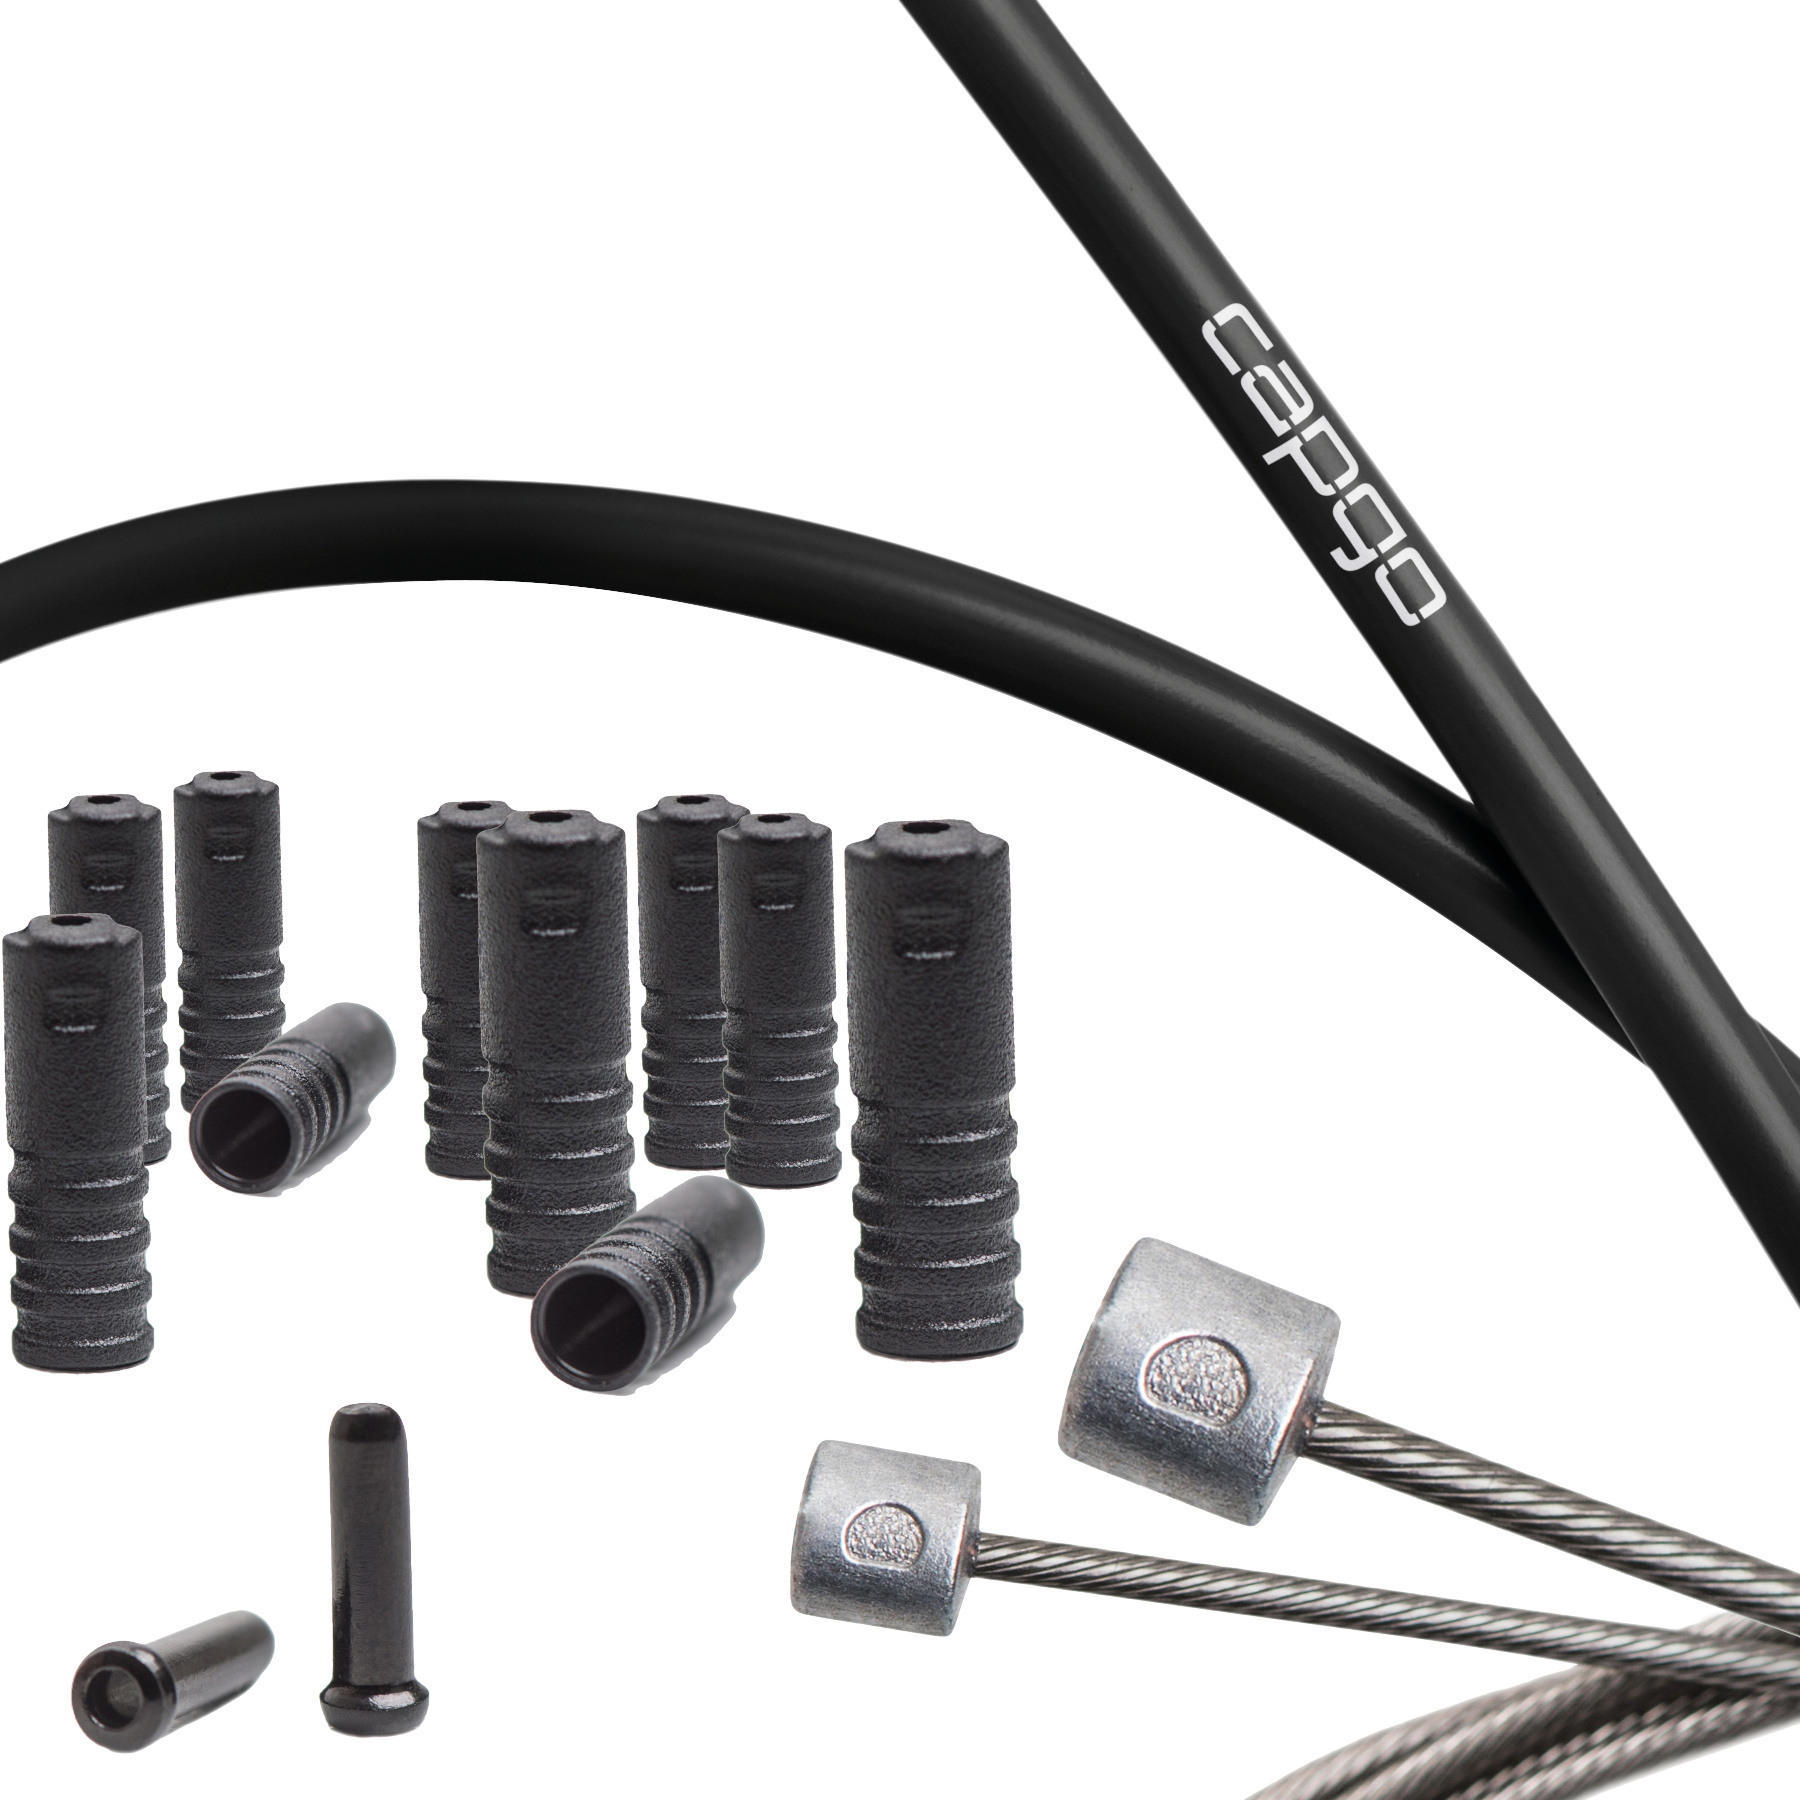 Picture of capgo Blue Line ECO Shift Cable Set - long - Stainless Steel - PTFE - Shimano/SRAM - black